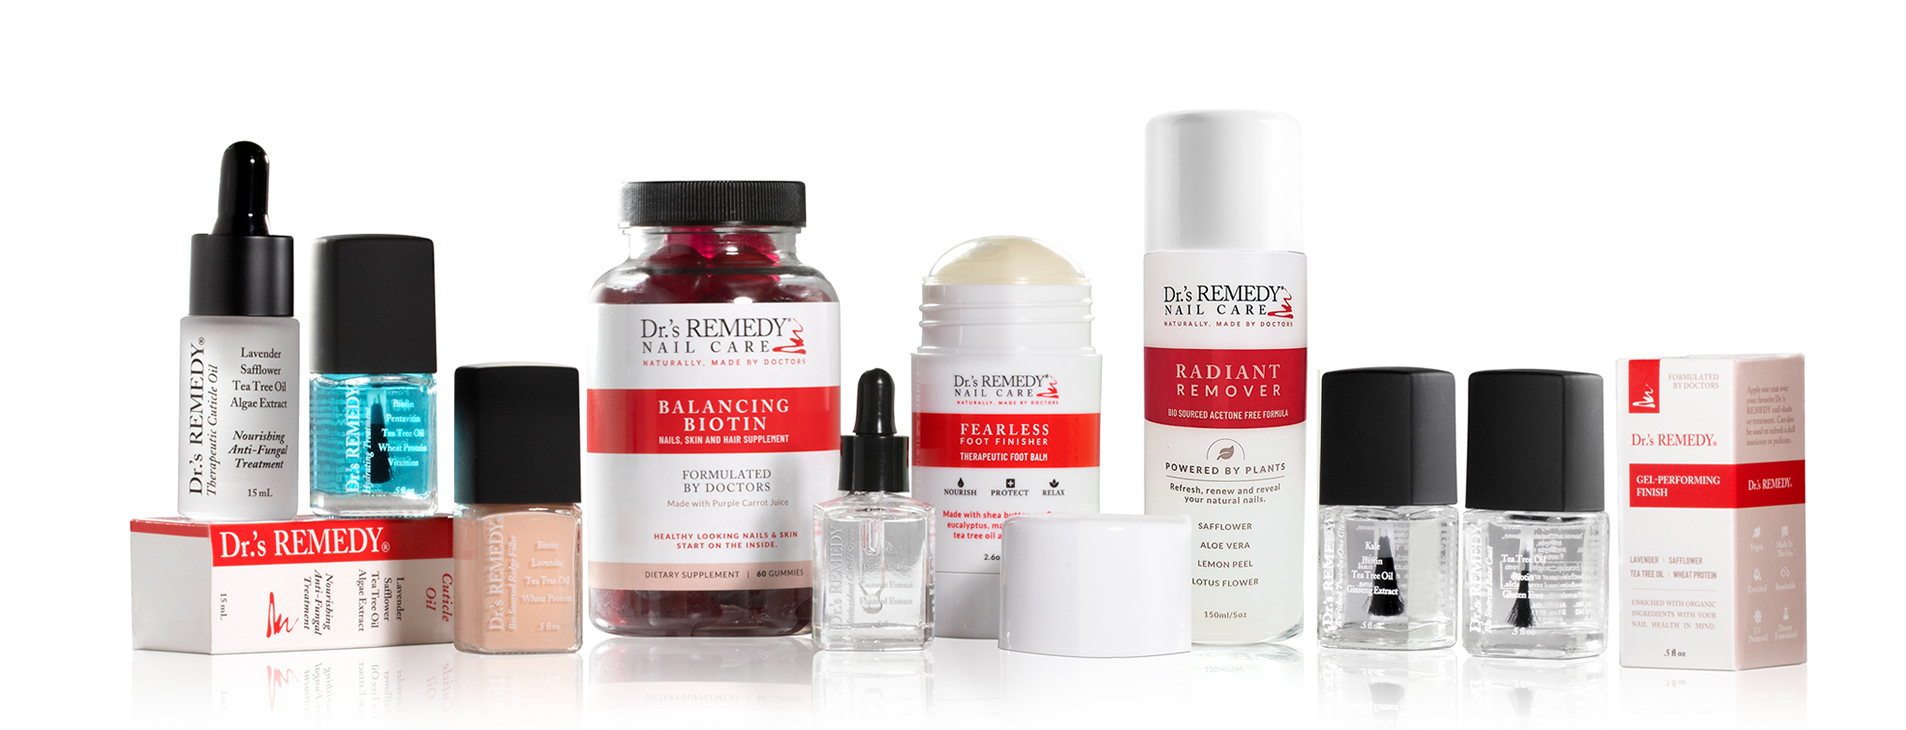 Podiatrist-formulated line of treatment products from Dr.'s REMEDY